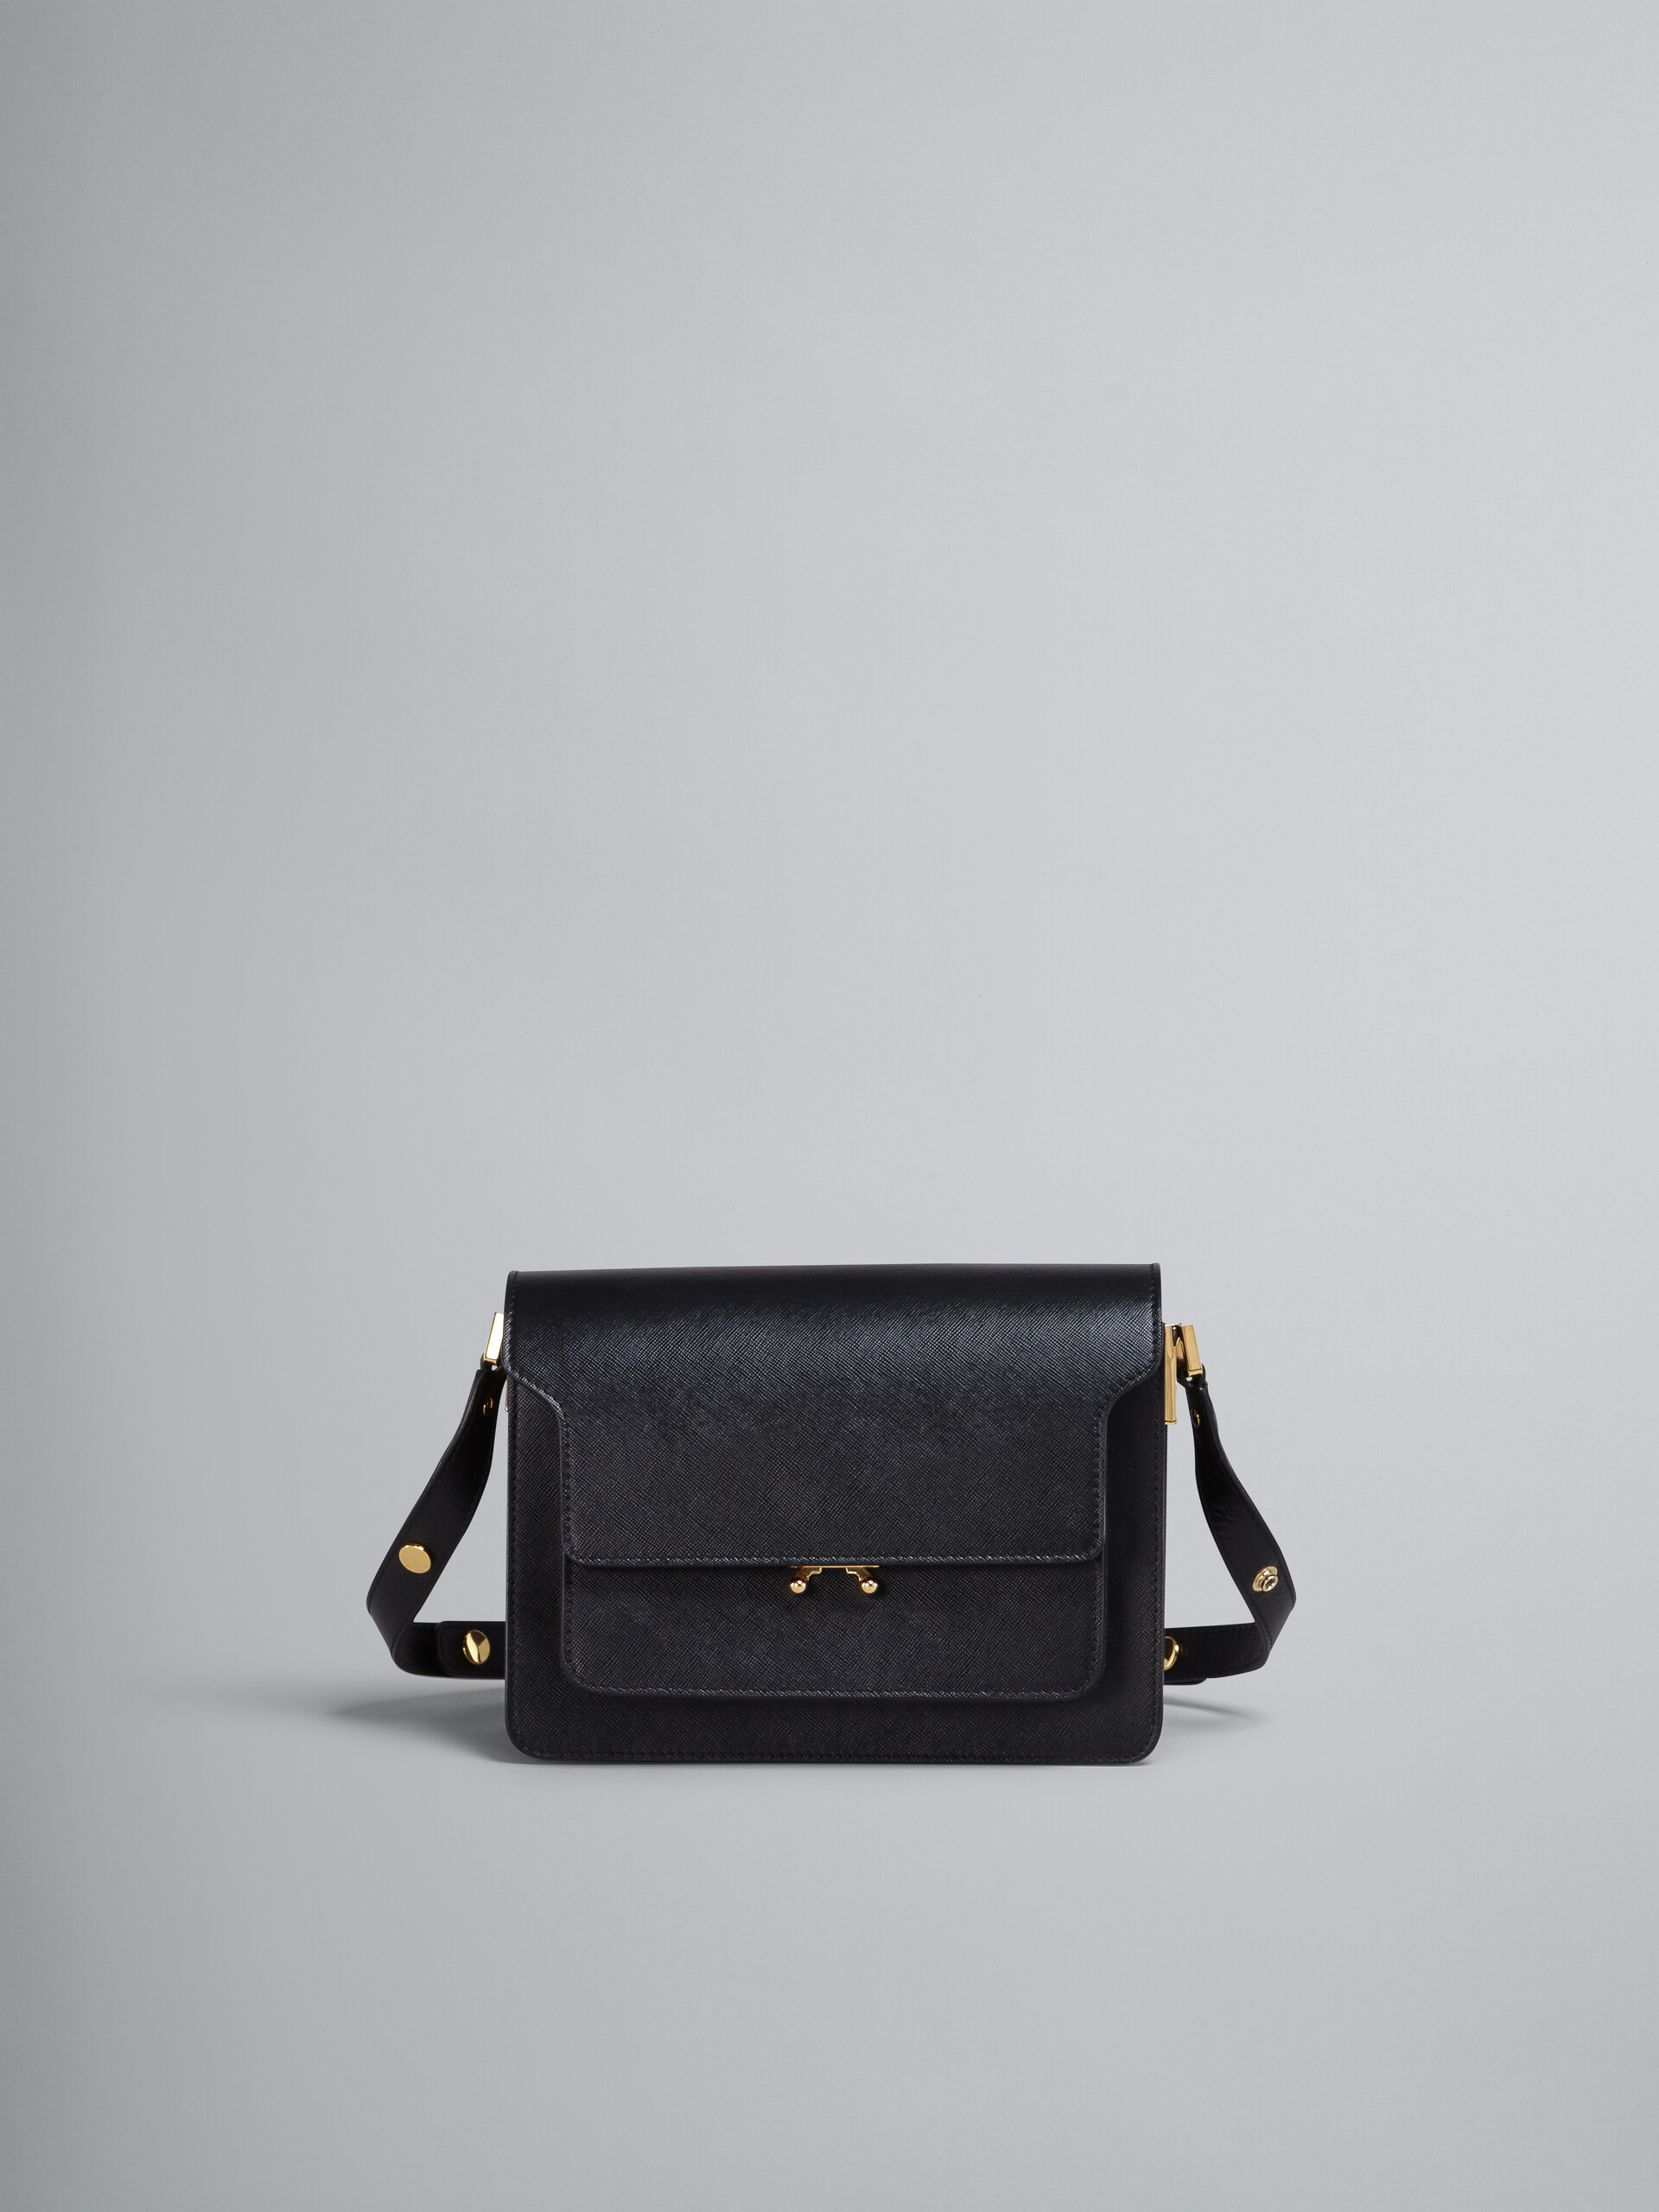 TRUNK bag in Saffiano leather - Shoulder Bags - Image 1